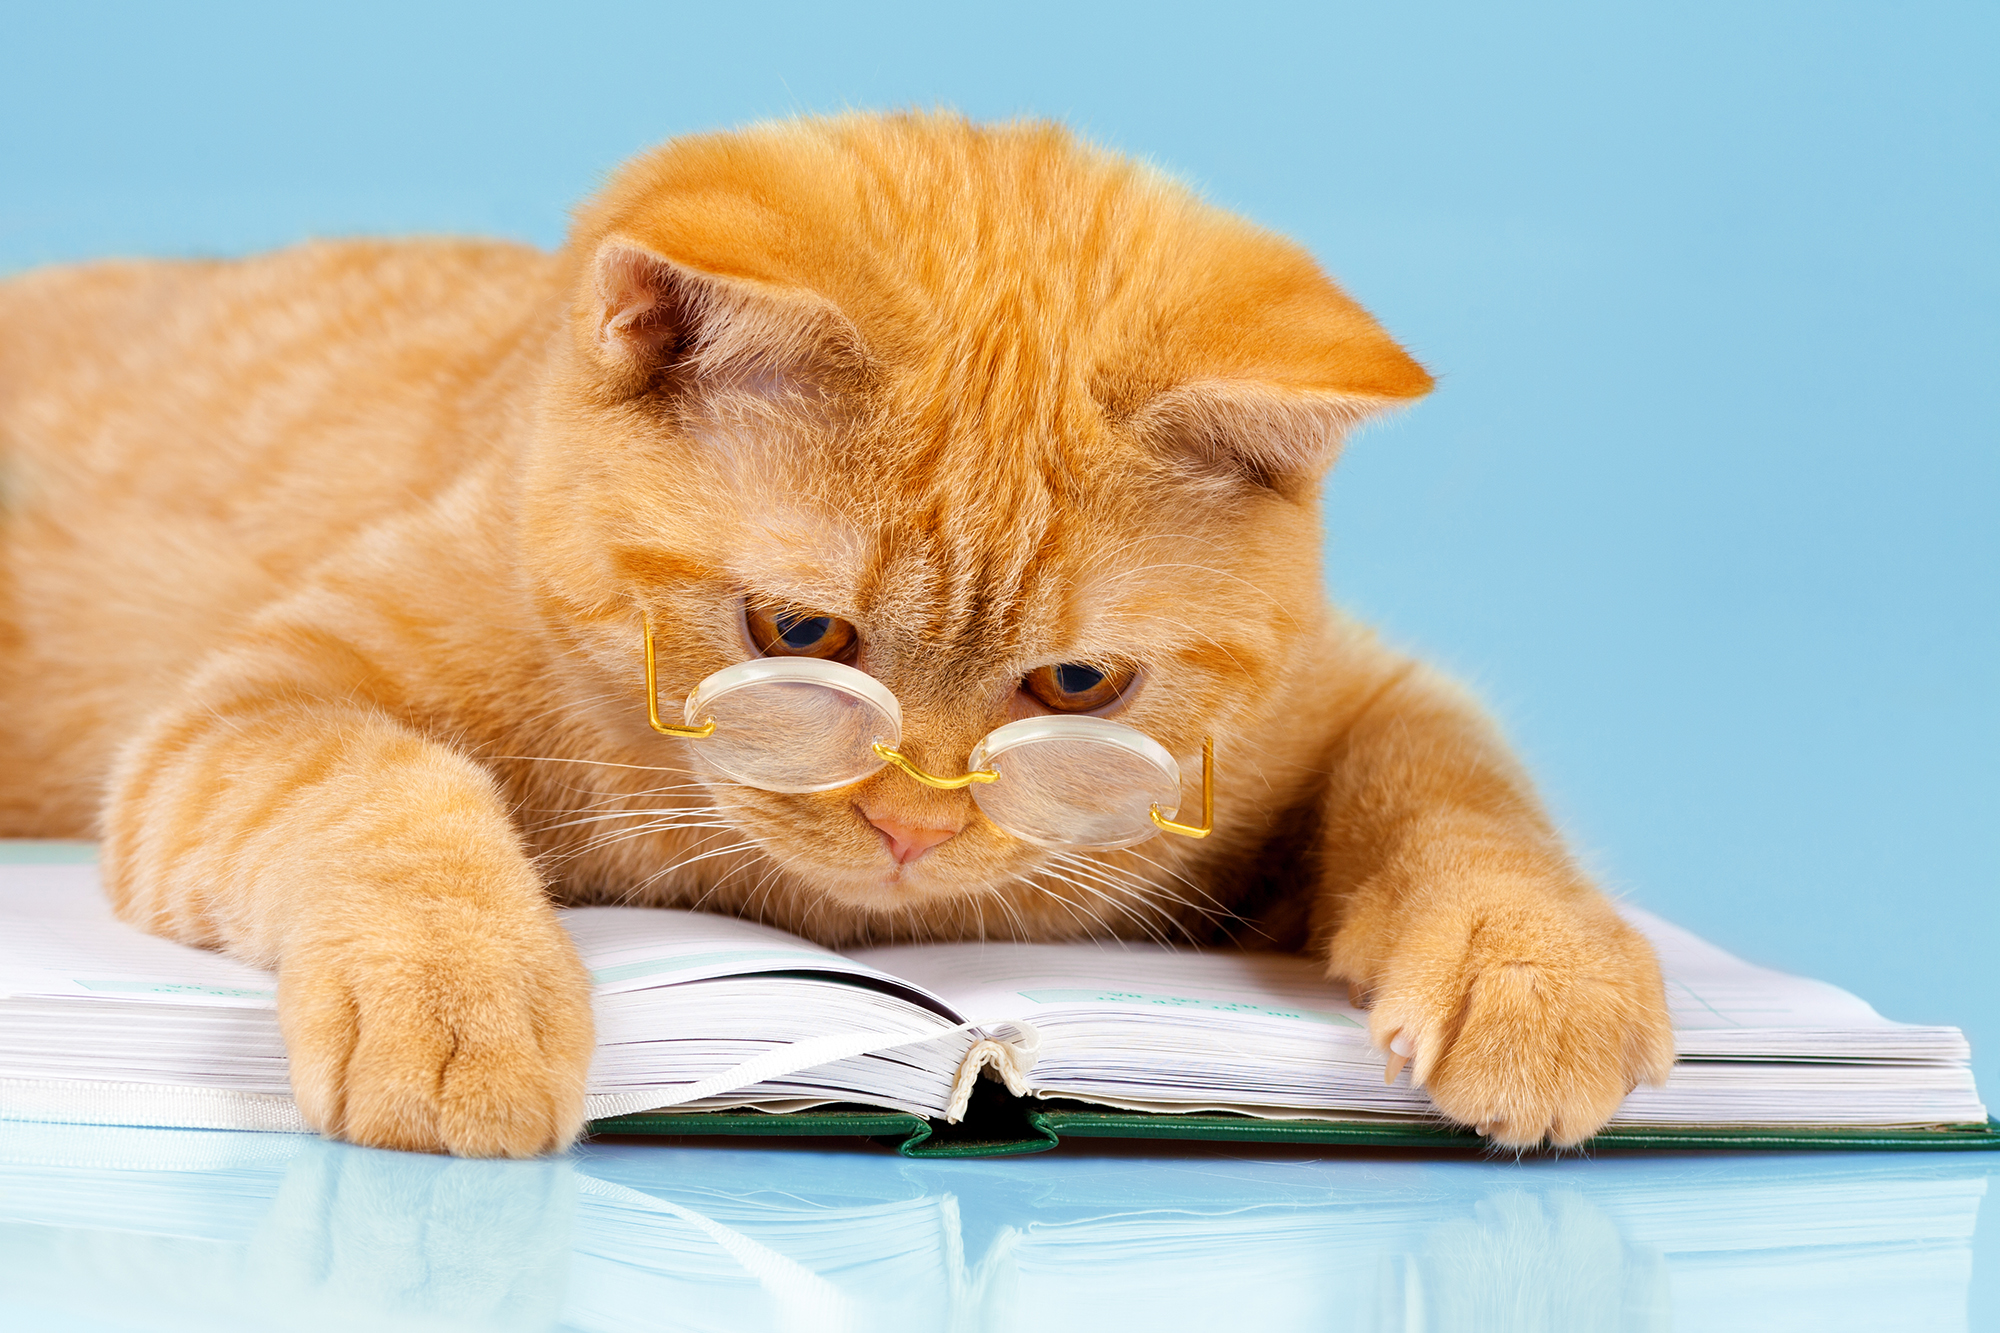 Descriptive image: a cat wearing glasses and looking at a book